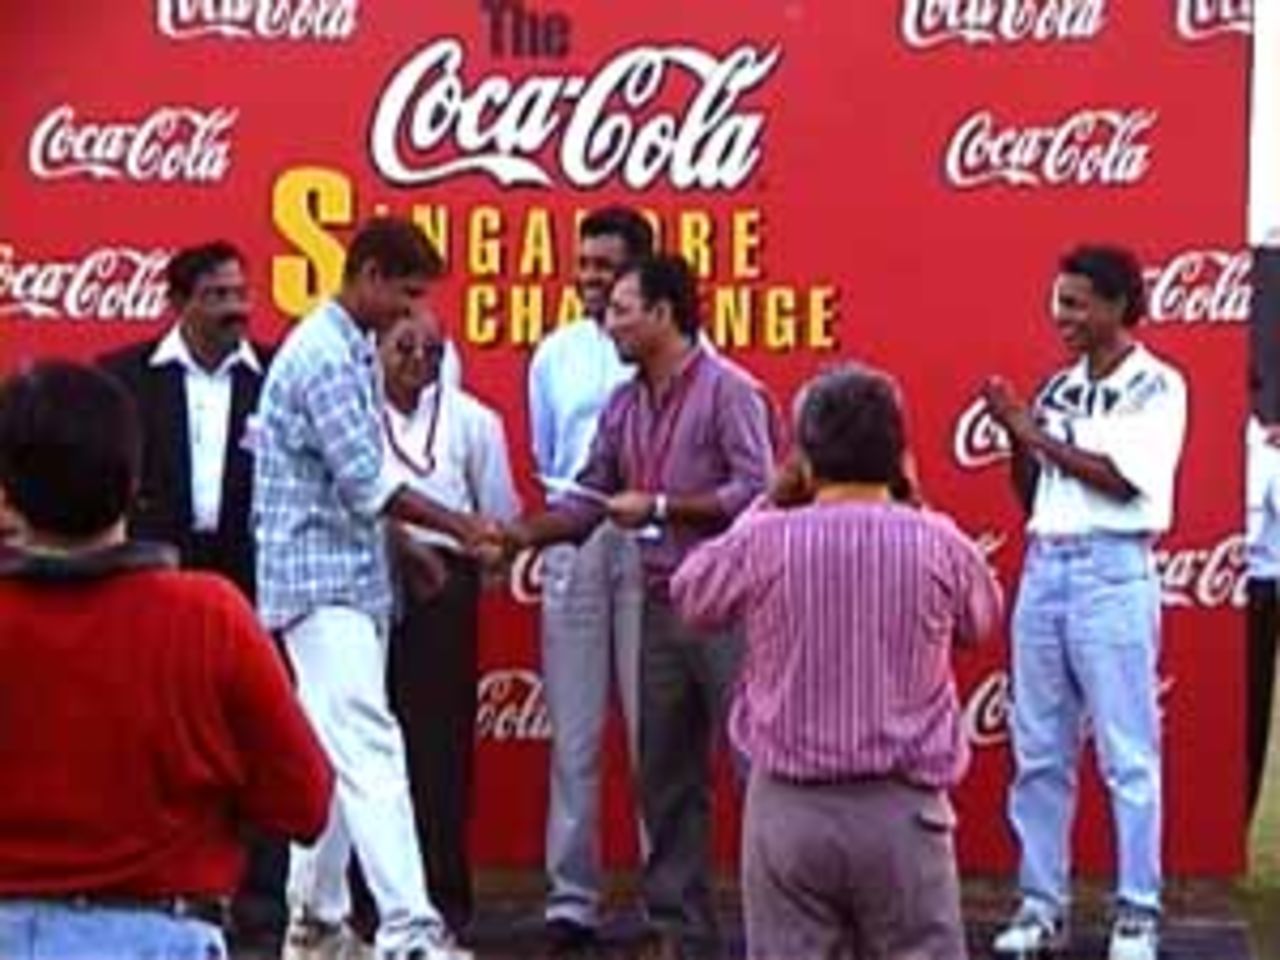 The spectator, richer by $250 for taking a catch in the stands, India v West Indies (3rd ODI), Coca-Cola Singapore Challenge, 1999-2000, Kallang Ground, Singapore, 5 Sep 1999.